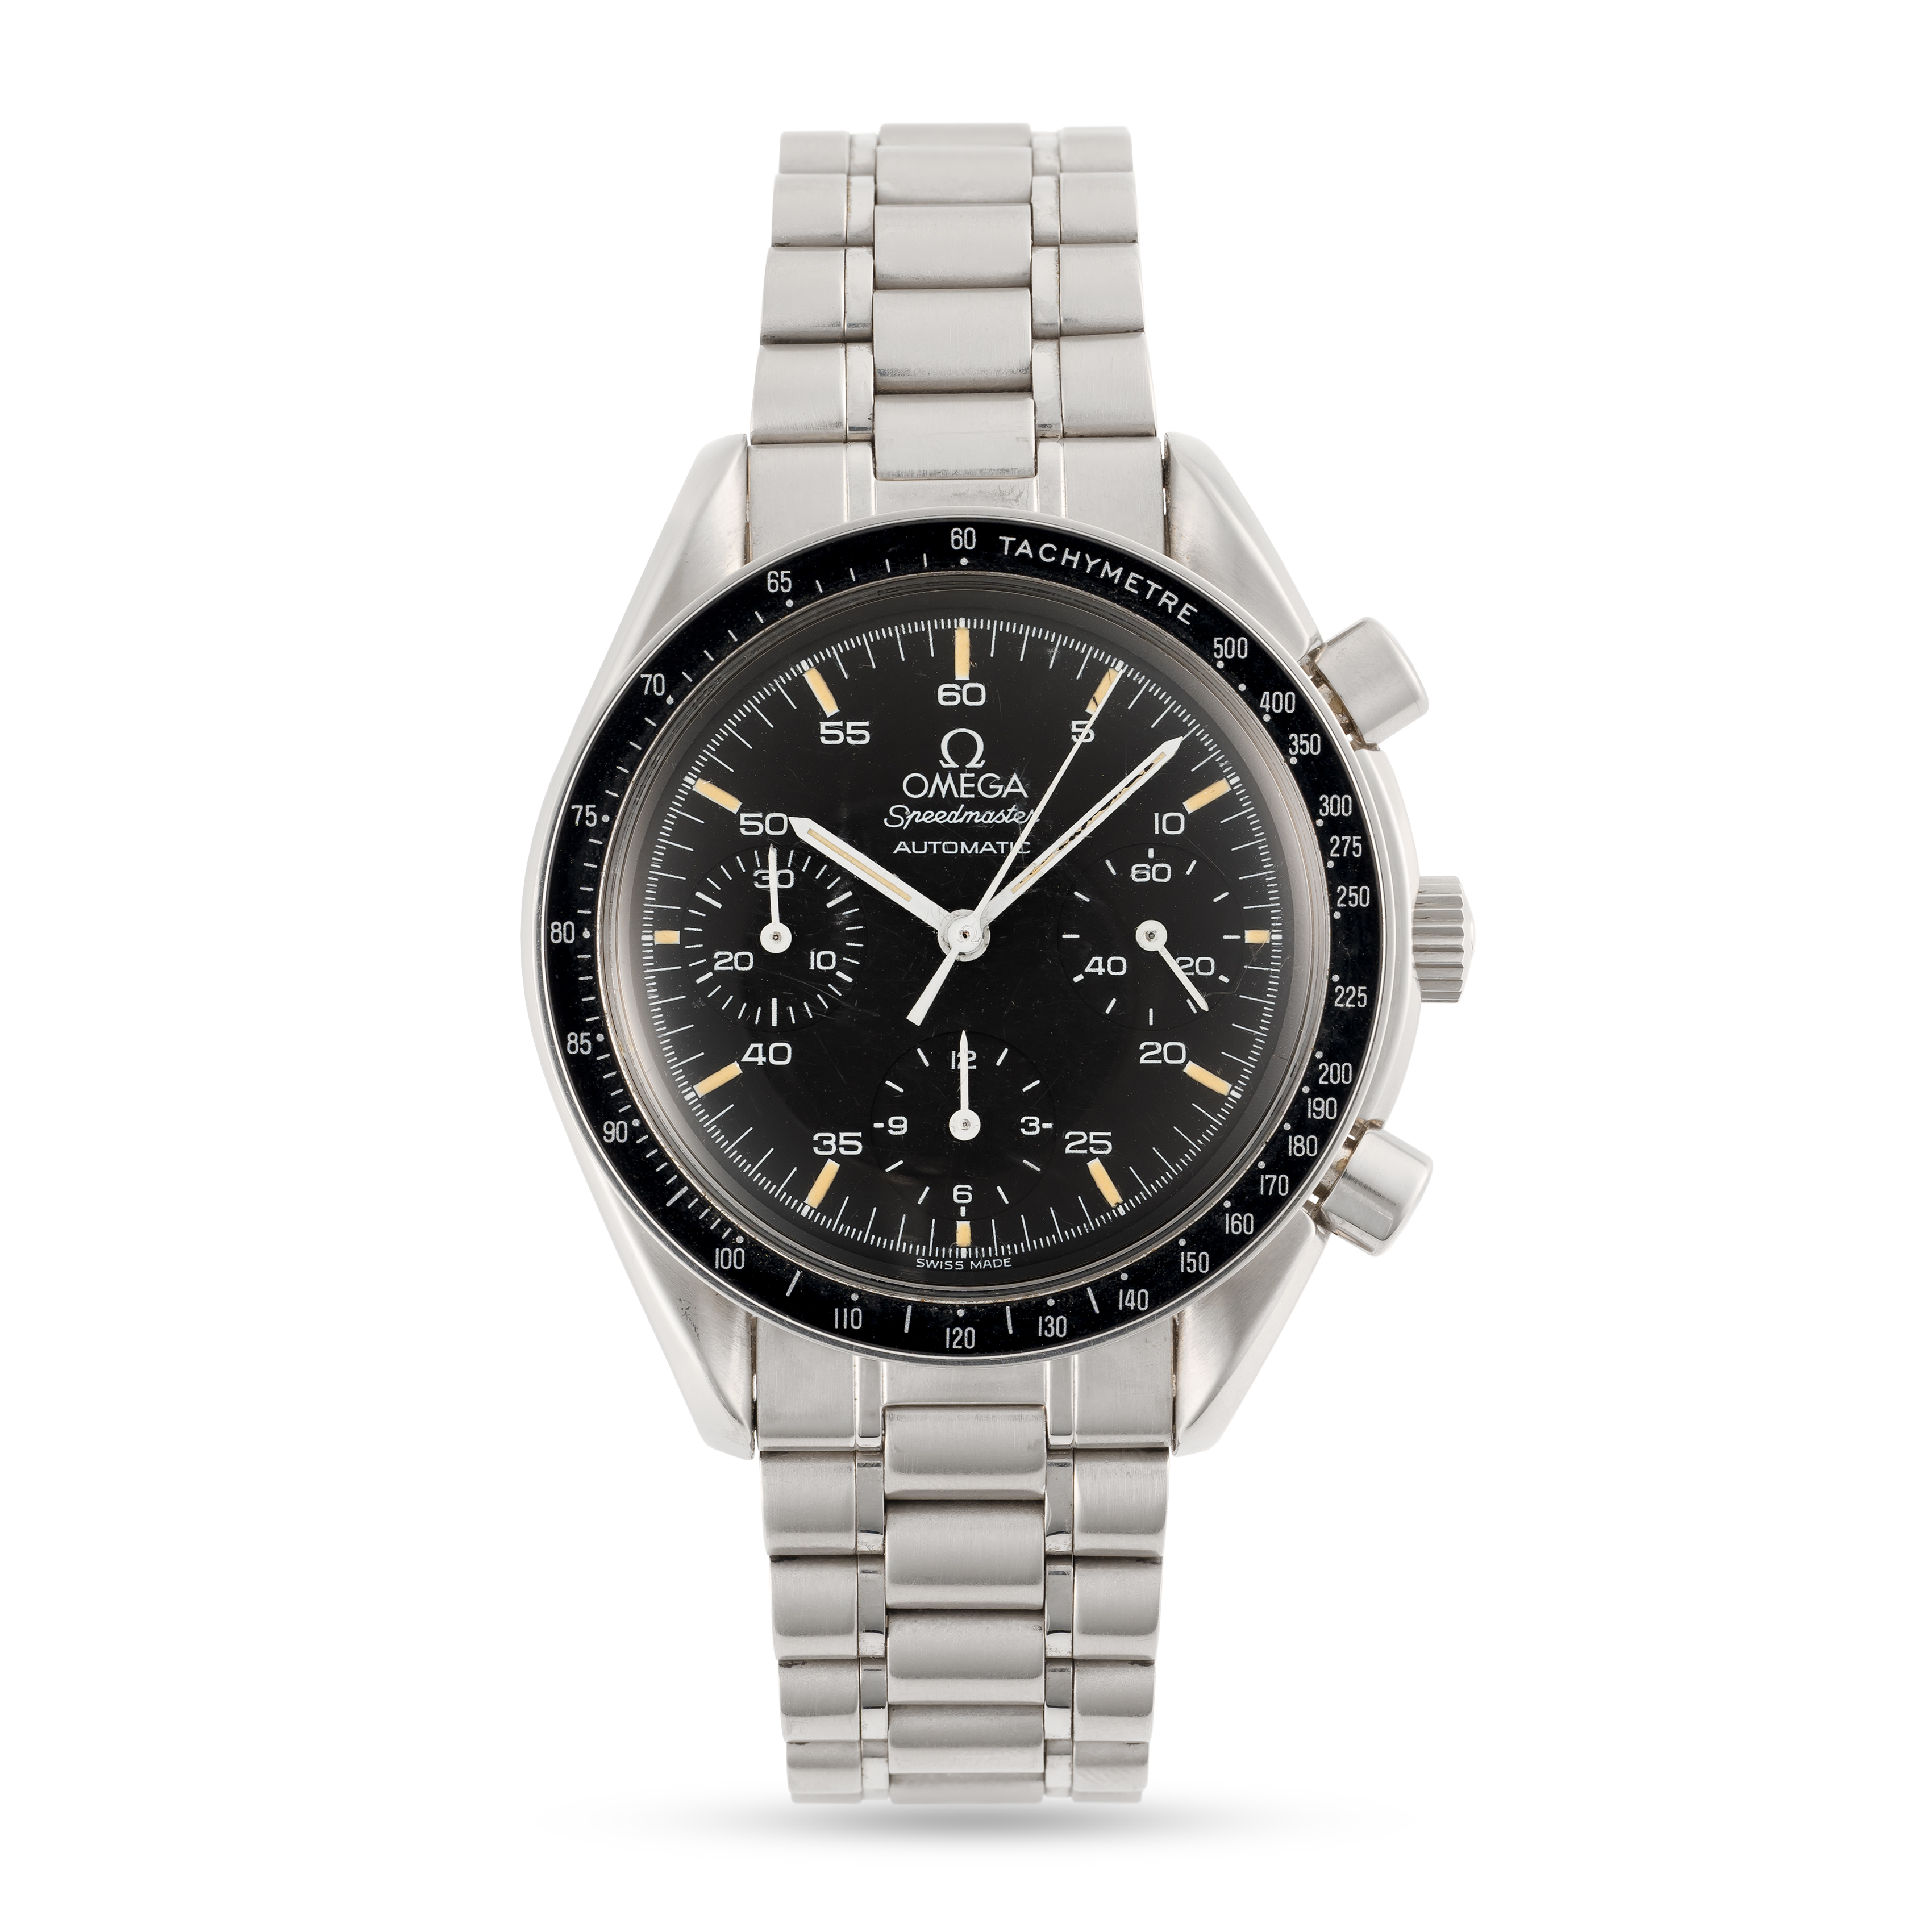 A GENTLEMAN'S SIZE STAINLESS STEEL OMEGA SPEEDMASTER REDUCED AUTOMATIC CHRONOGRAPH BRACELET WATCH - Image 2 of 8